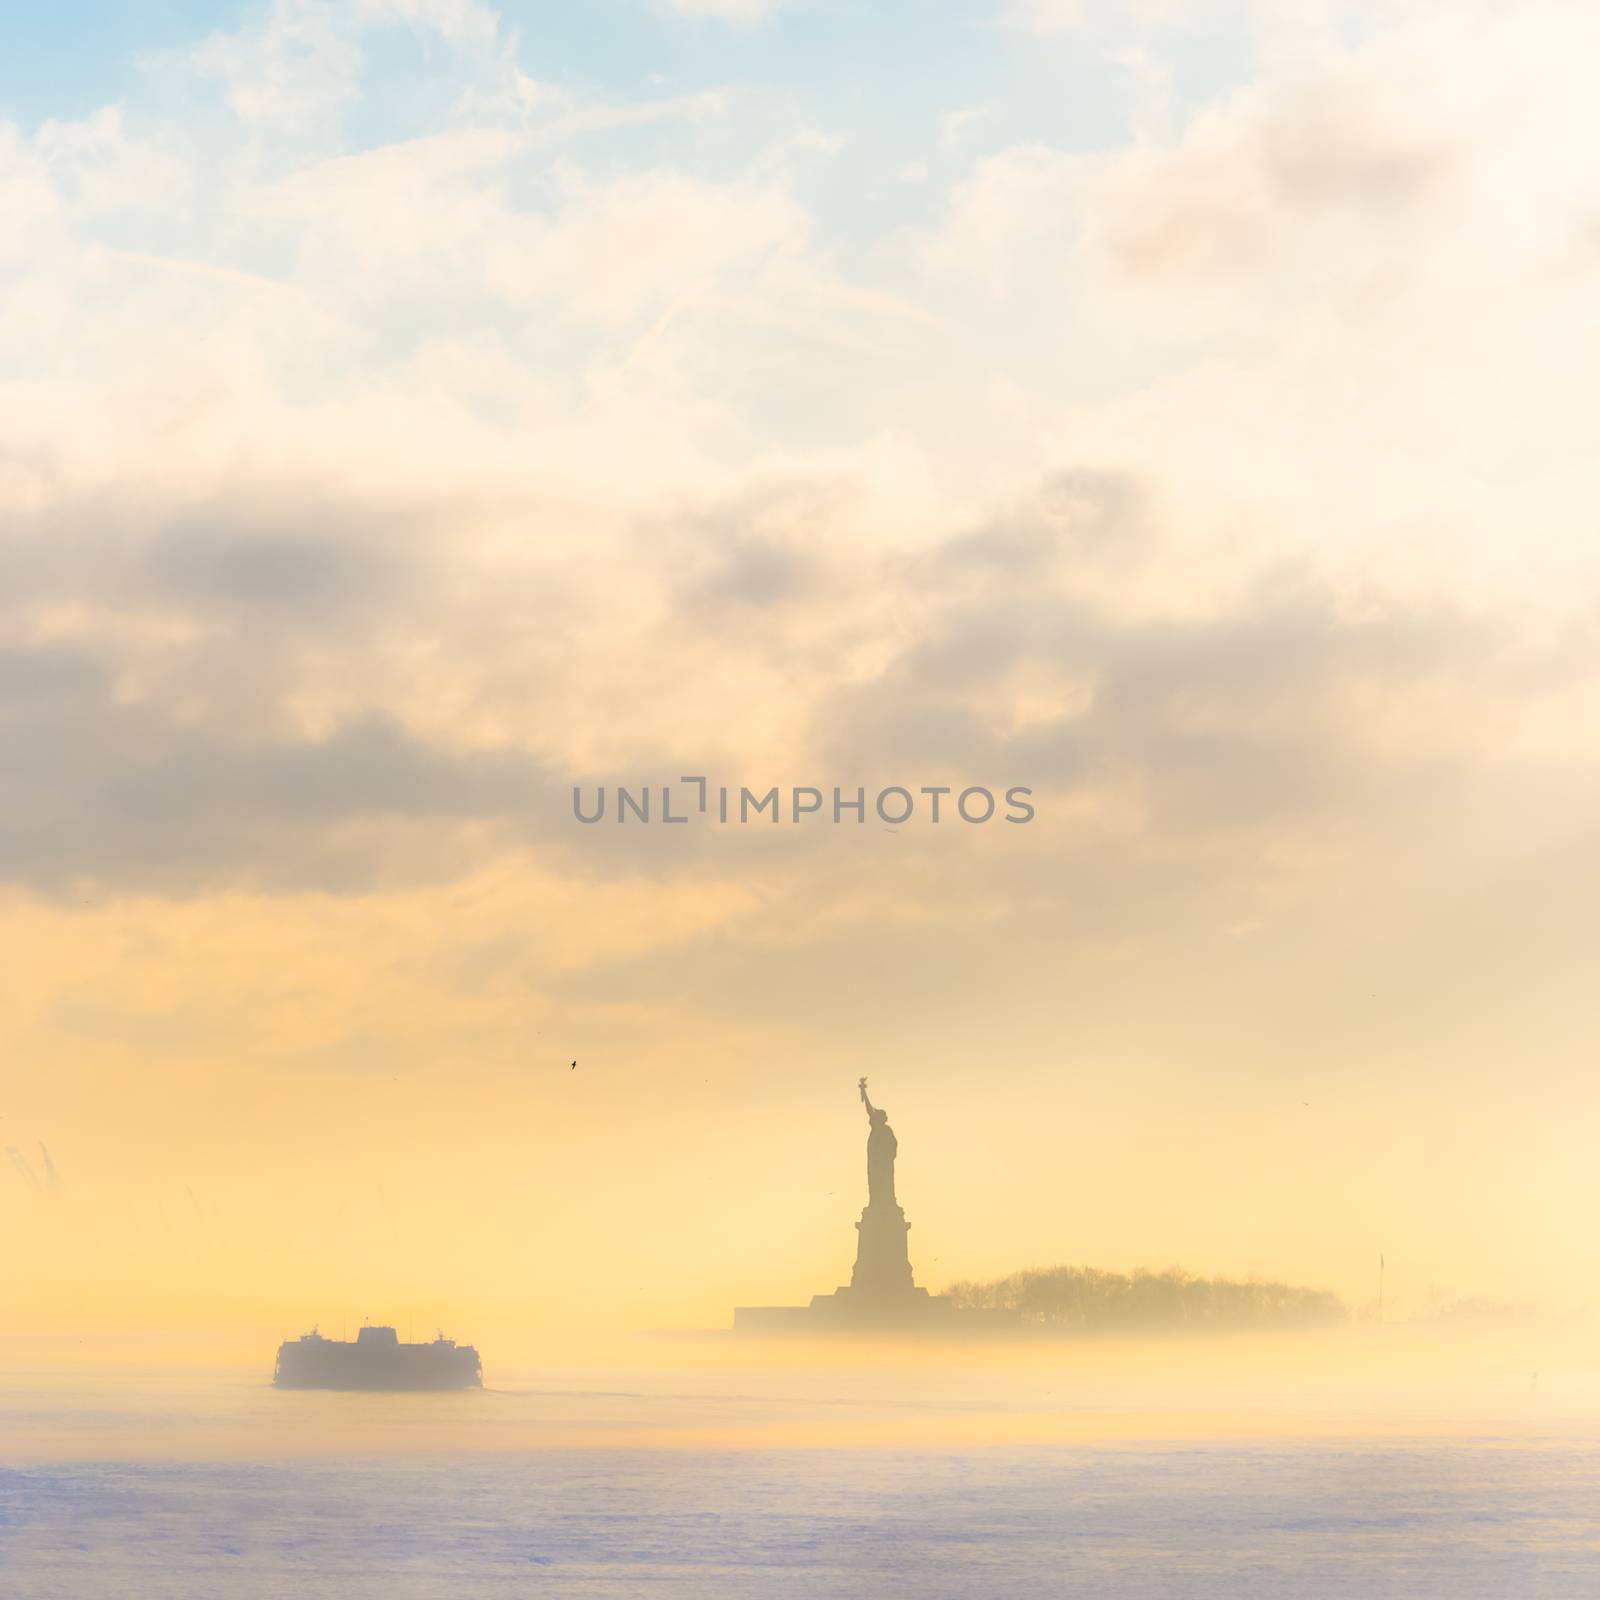 Staten Island Ferry cruises past the Statue of Liberty on a misty sunset. Manhattan, New York City, United States of America. Square composition. Copy space.